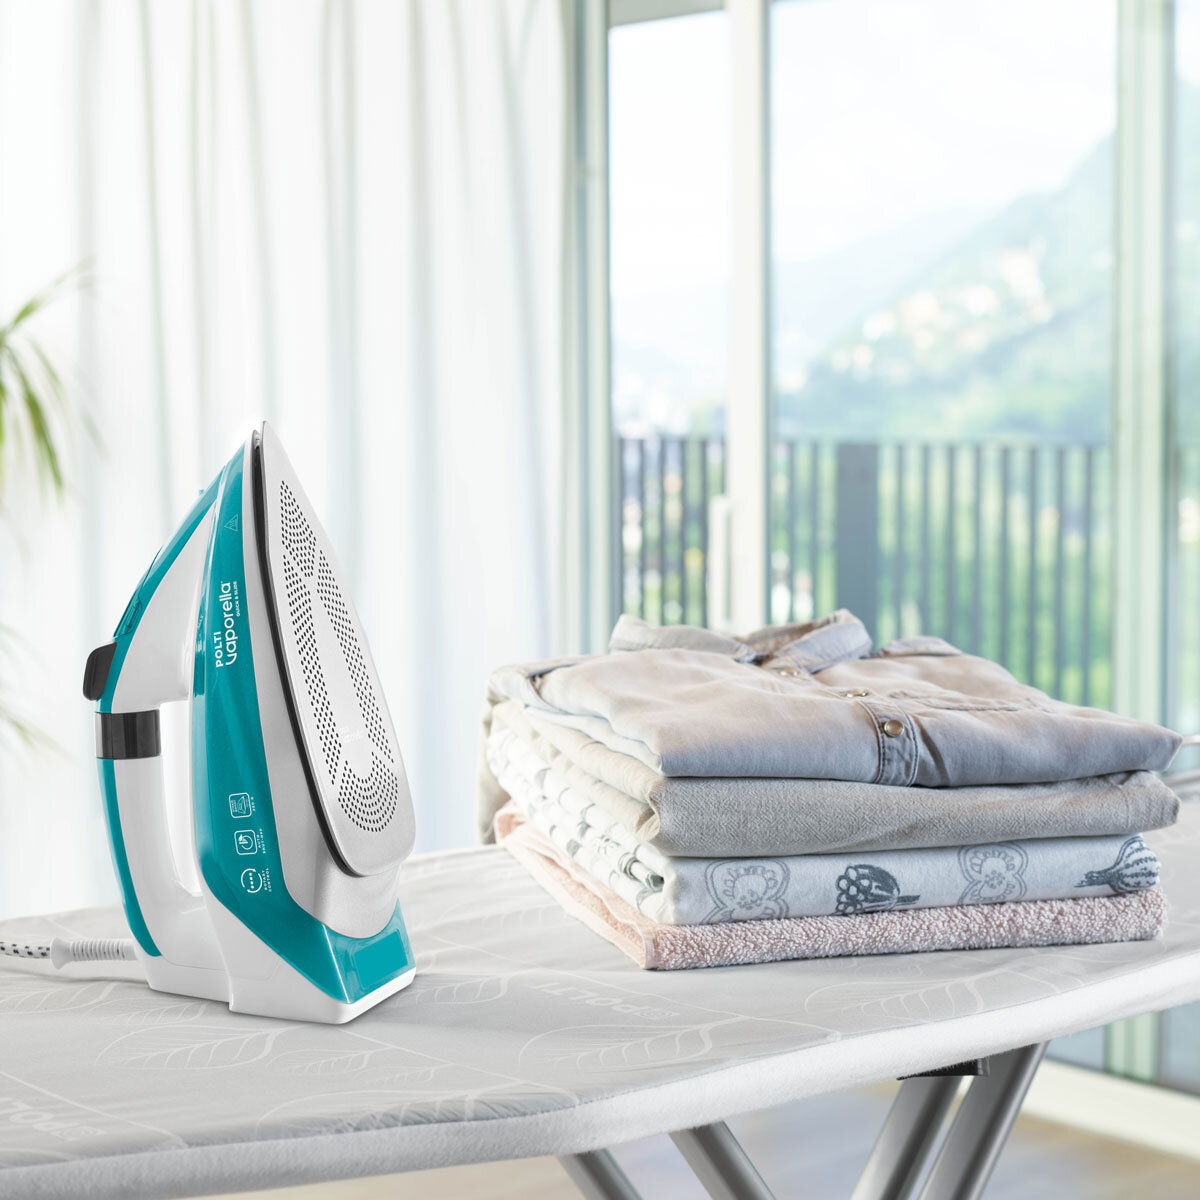 Lifestyle Image Polti Vaporella QS211 with a pile of ironing